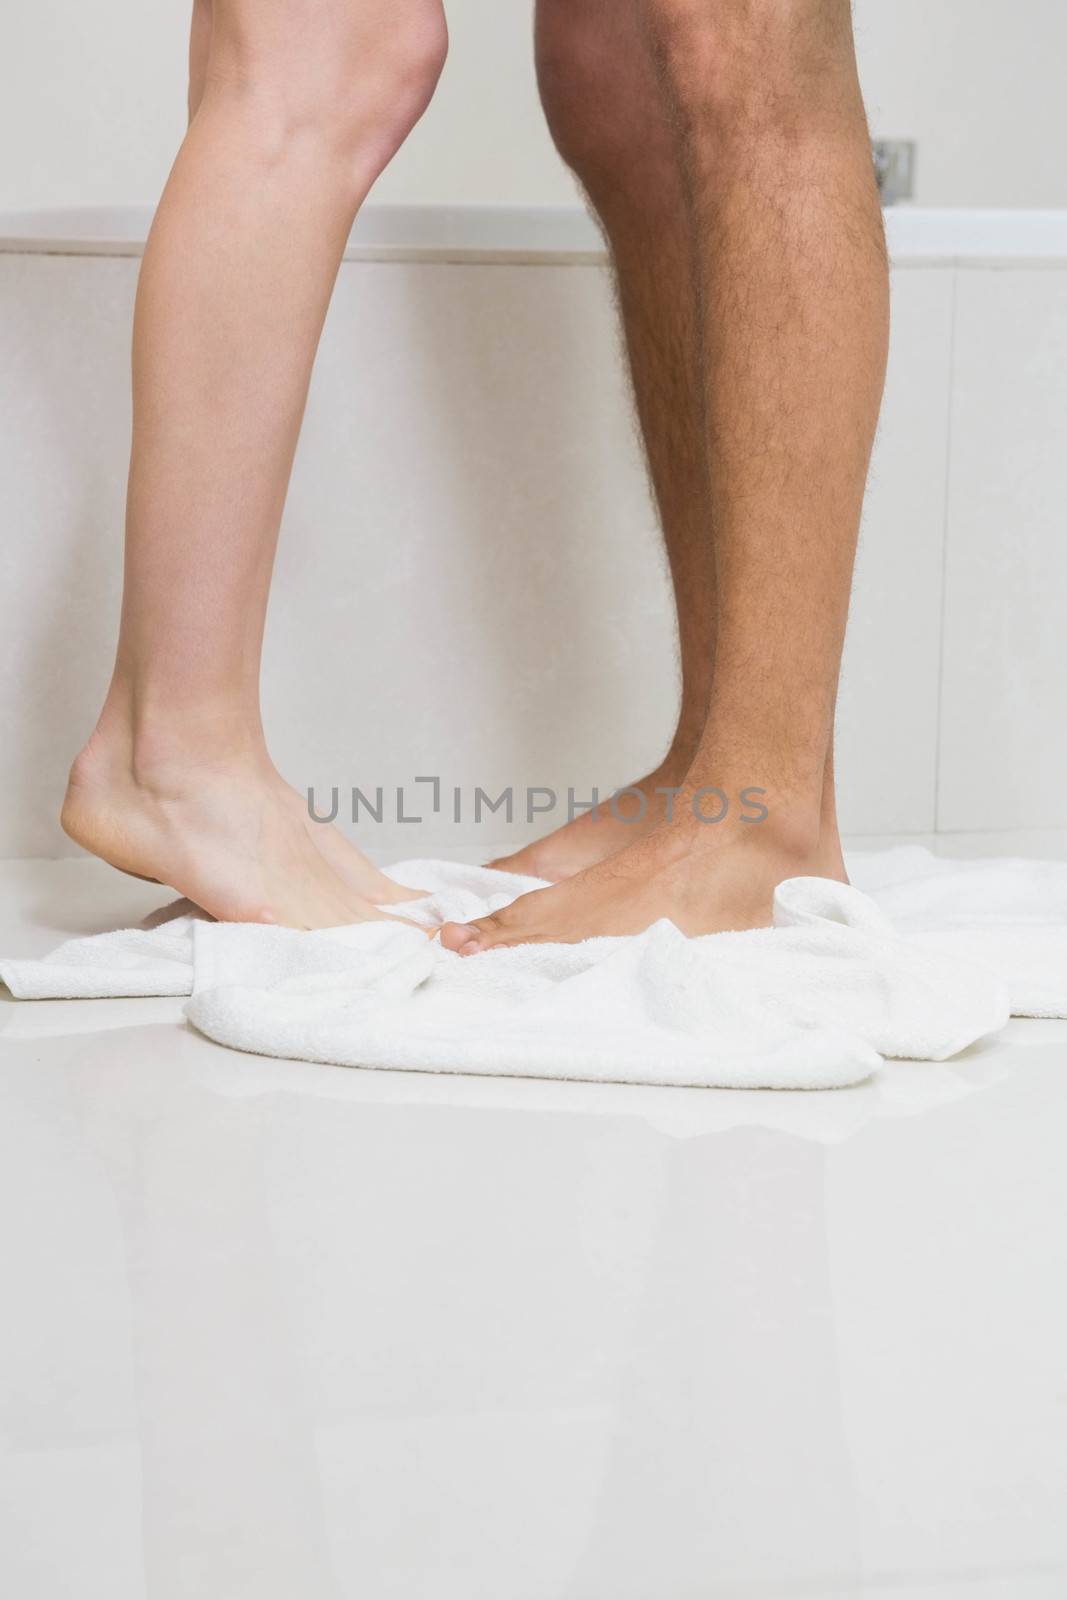 Young couple bathing together in bathtub in bathroom